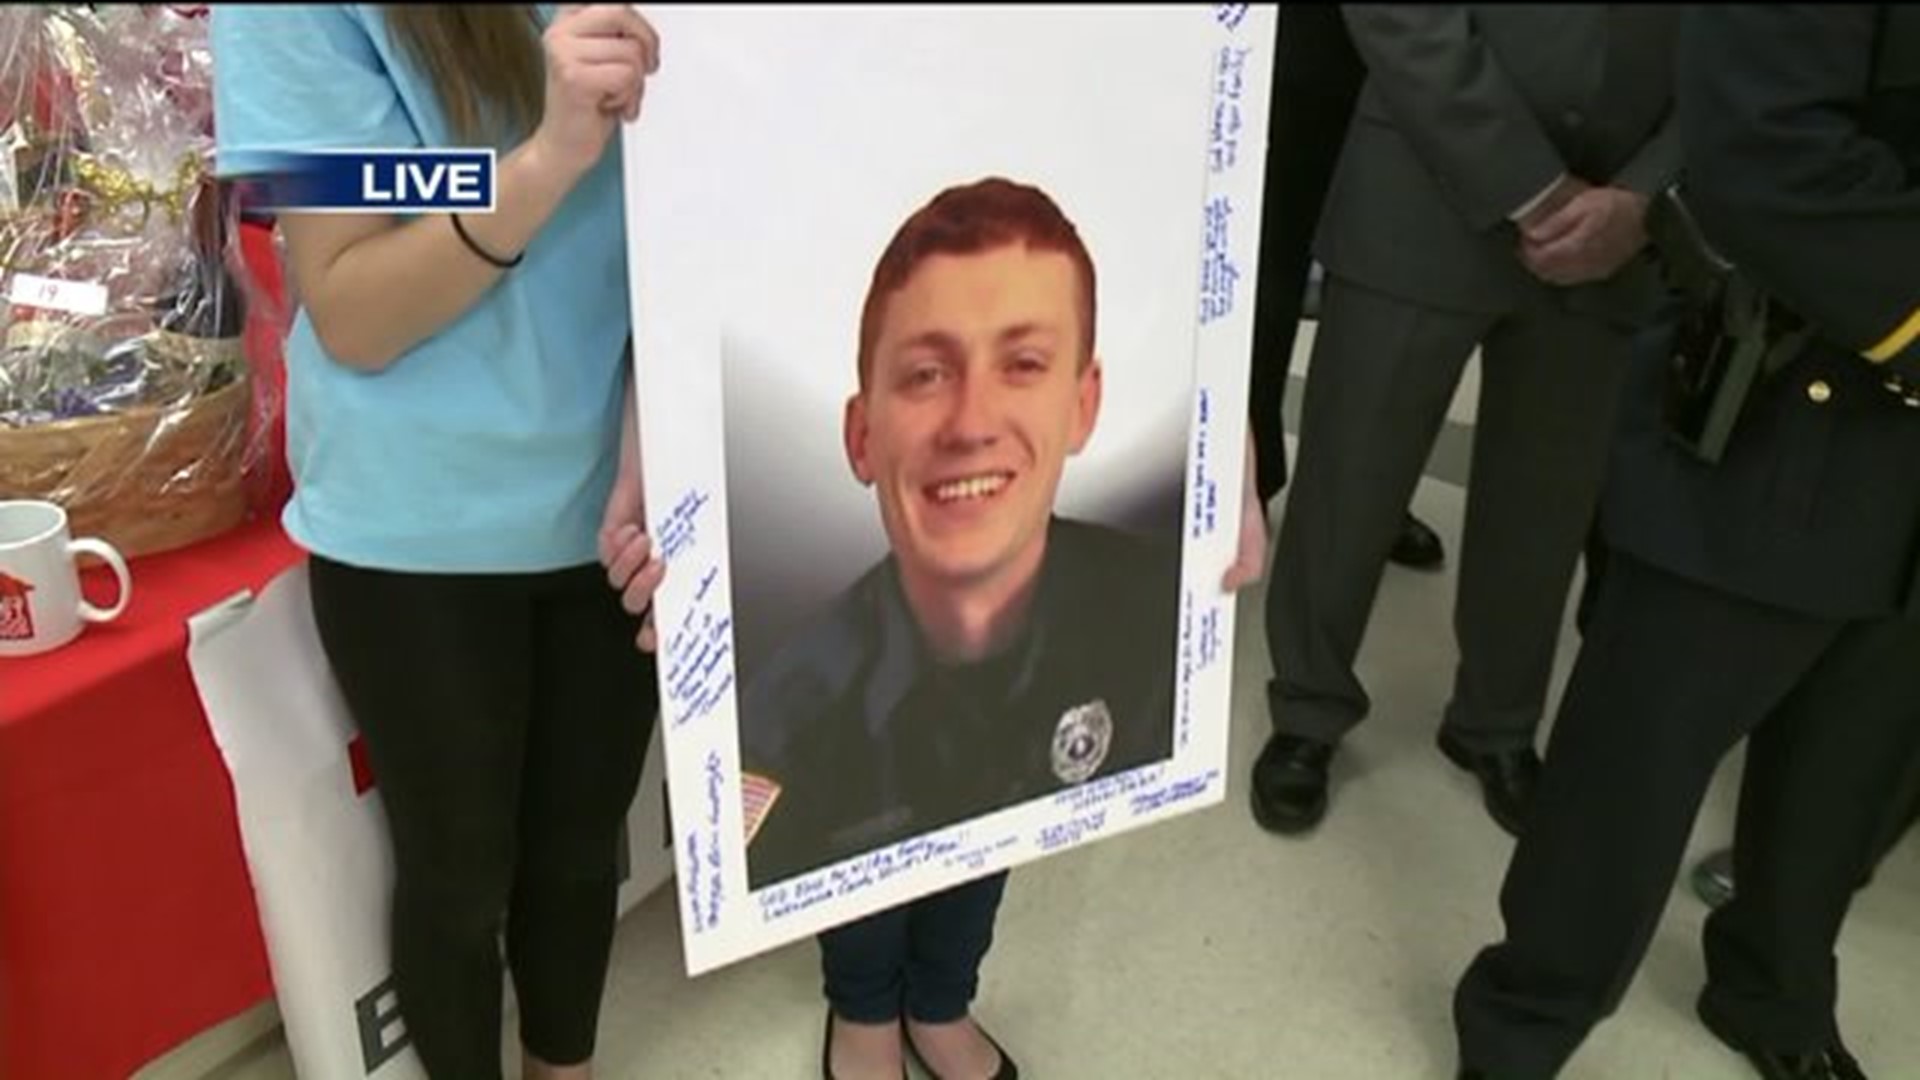 Blood Drive & Fundraiser To Help Family Of Fallen Scranton Police Officer